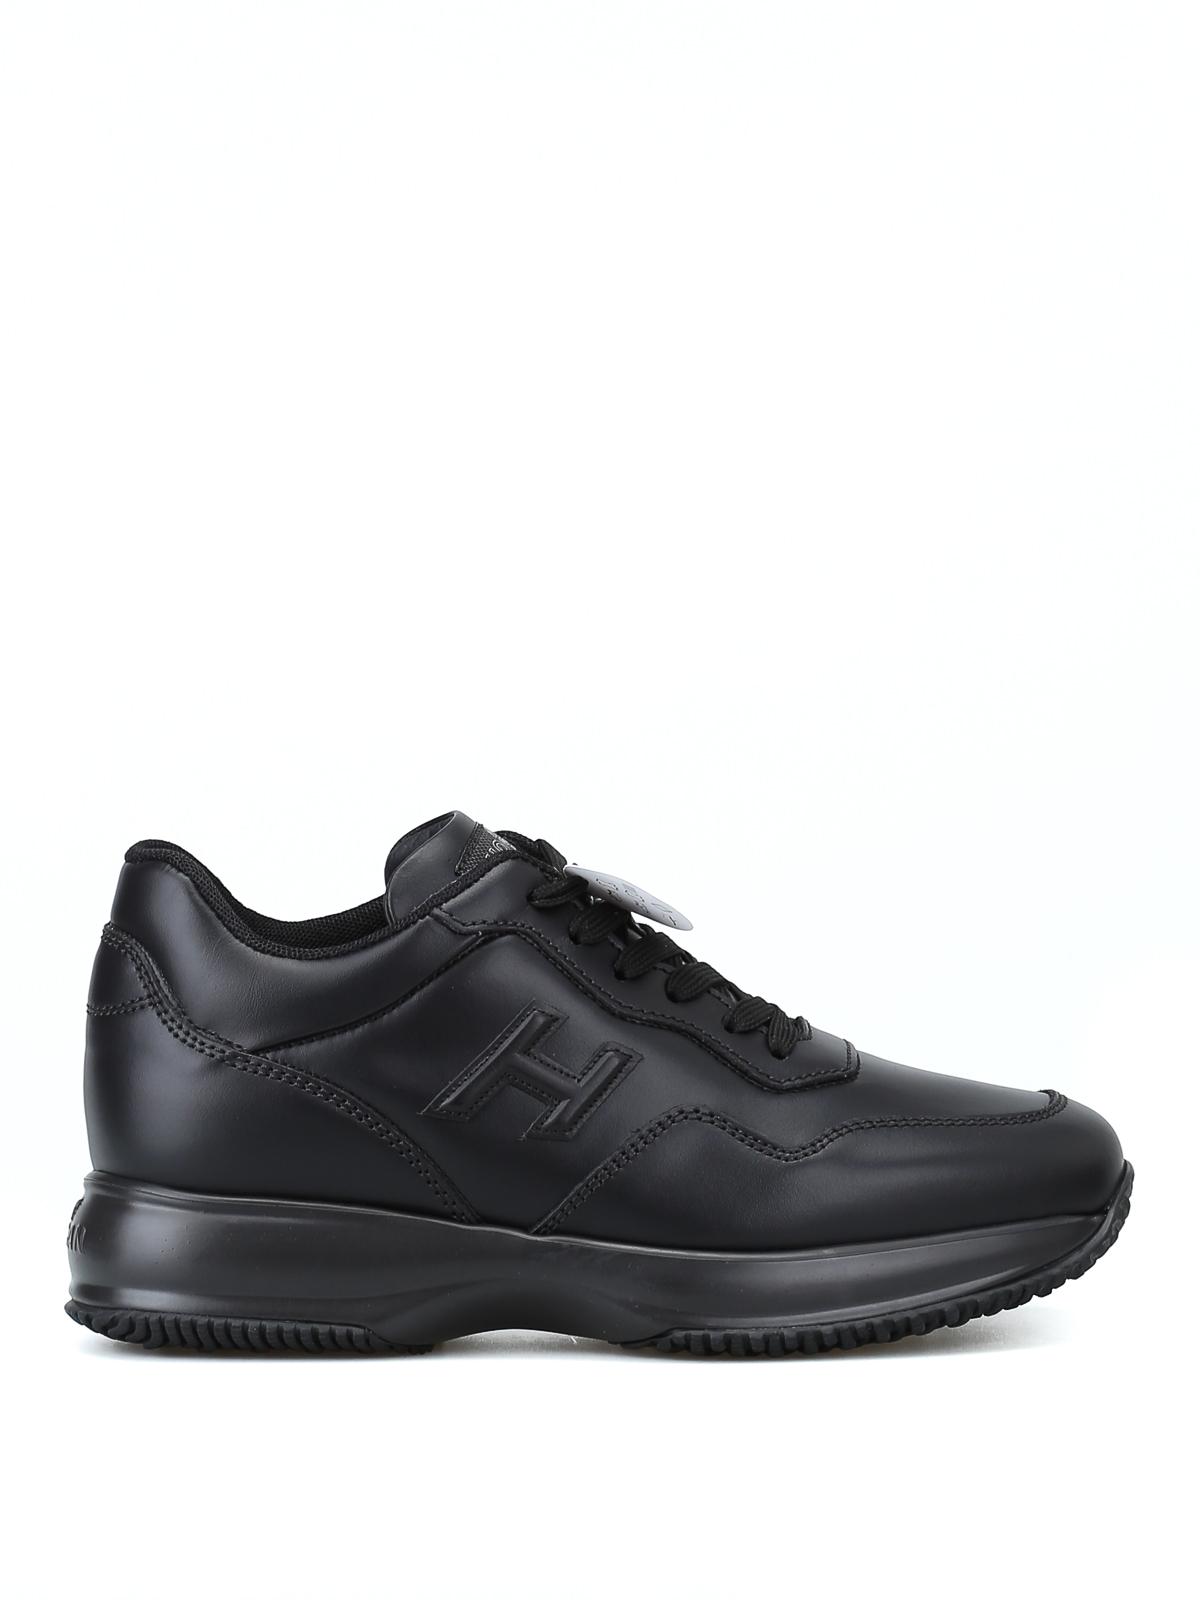 Hogan Interactive Black Leather H 3d Sneakers for Men - Lyst